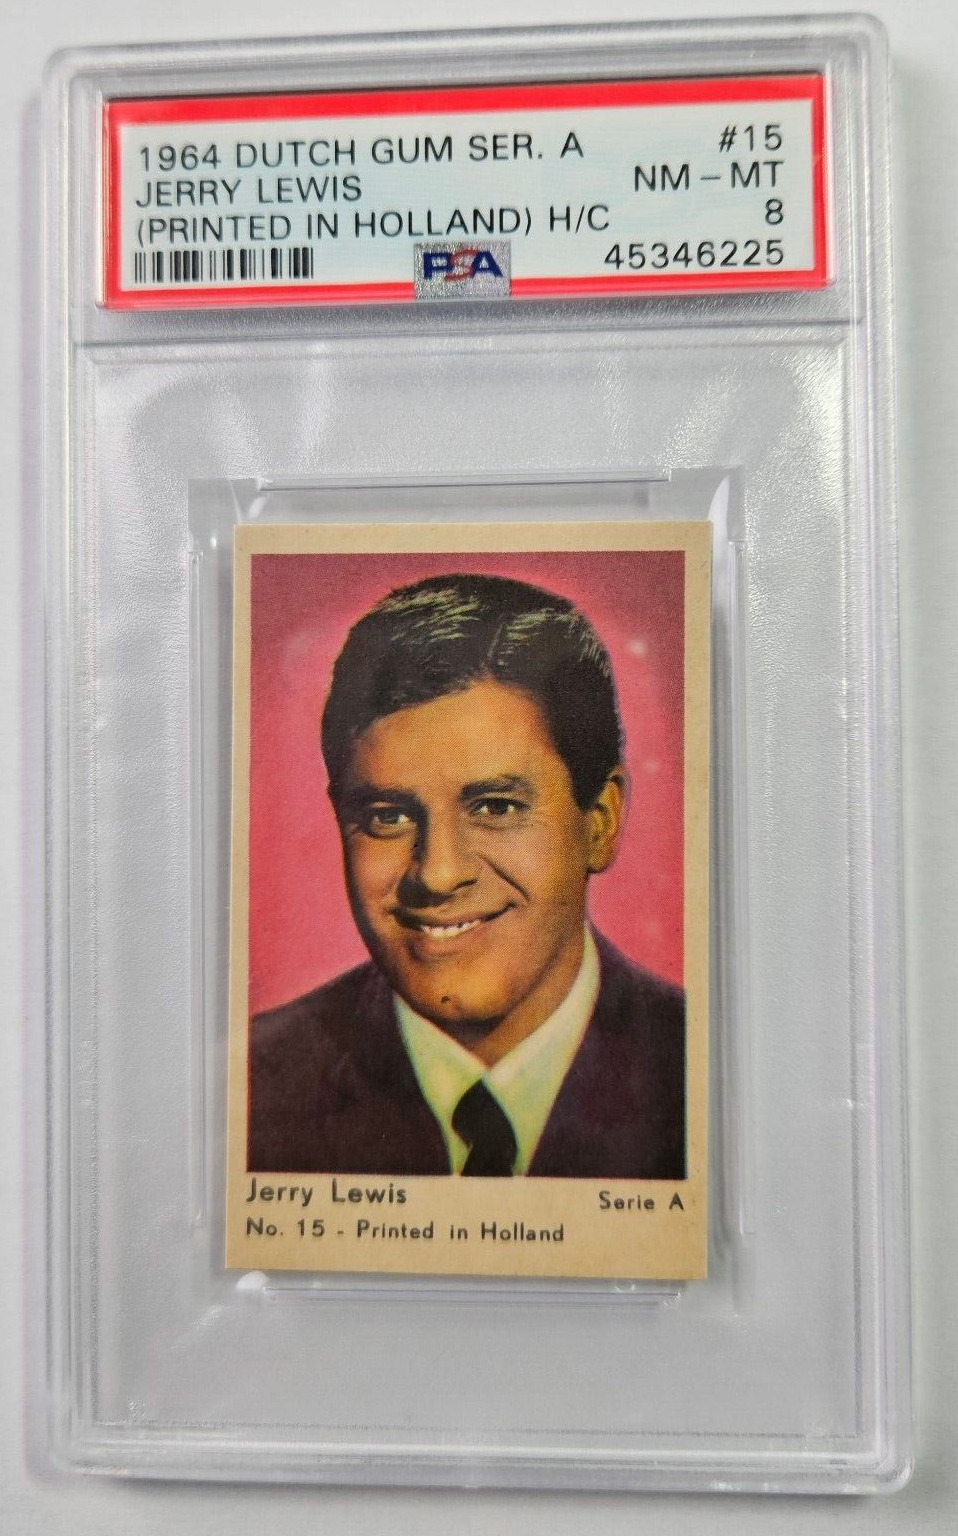 1964 DUTCH GUM Serie A #15 JERRY LEWIS - PSA 8 NM-MT  ONLY 1 GRADED HIGHER (B)